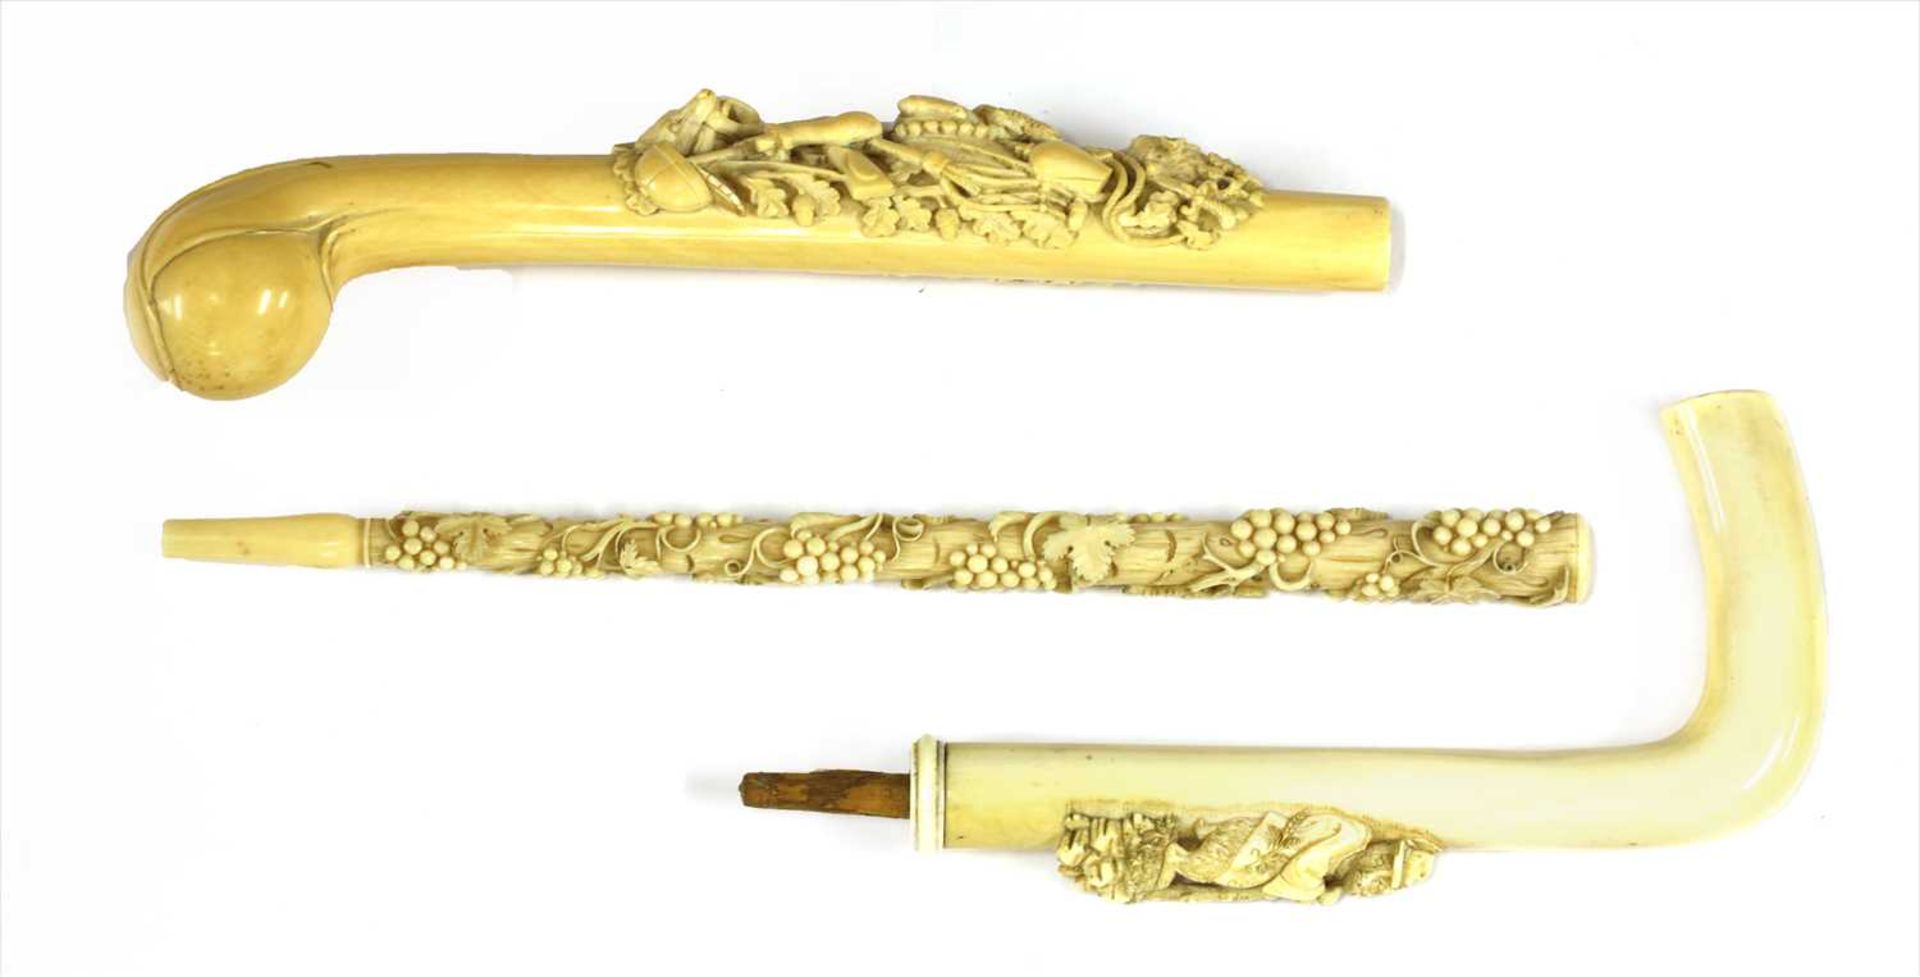 Three carved ivory parasol or walking stick handles,